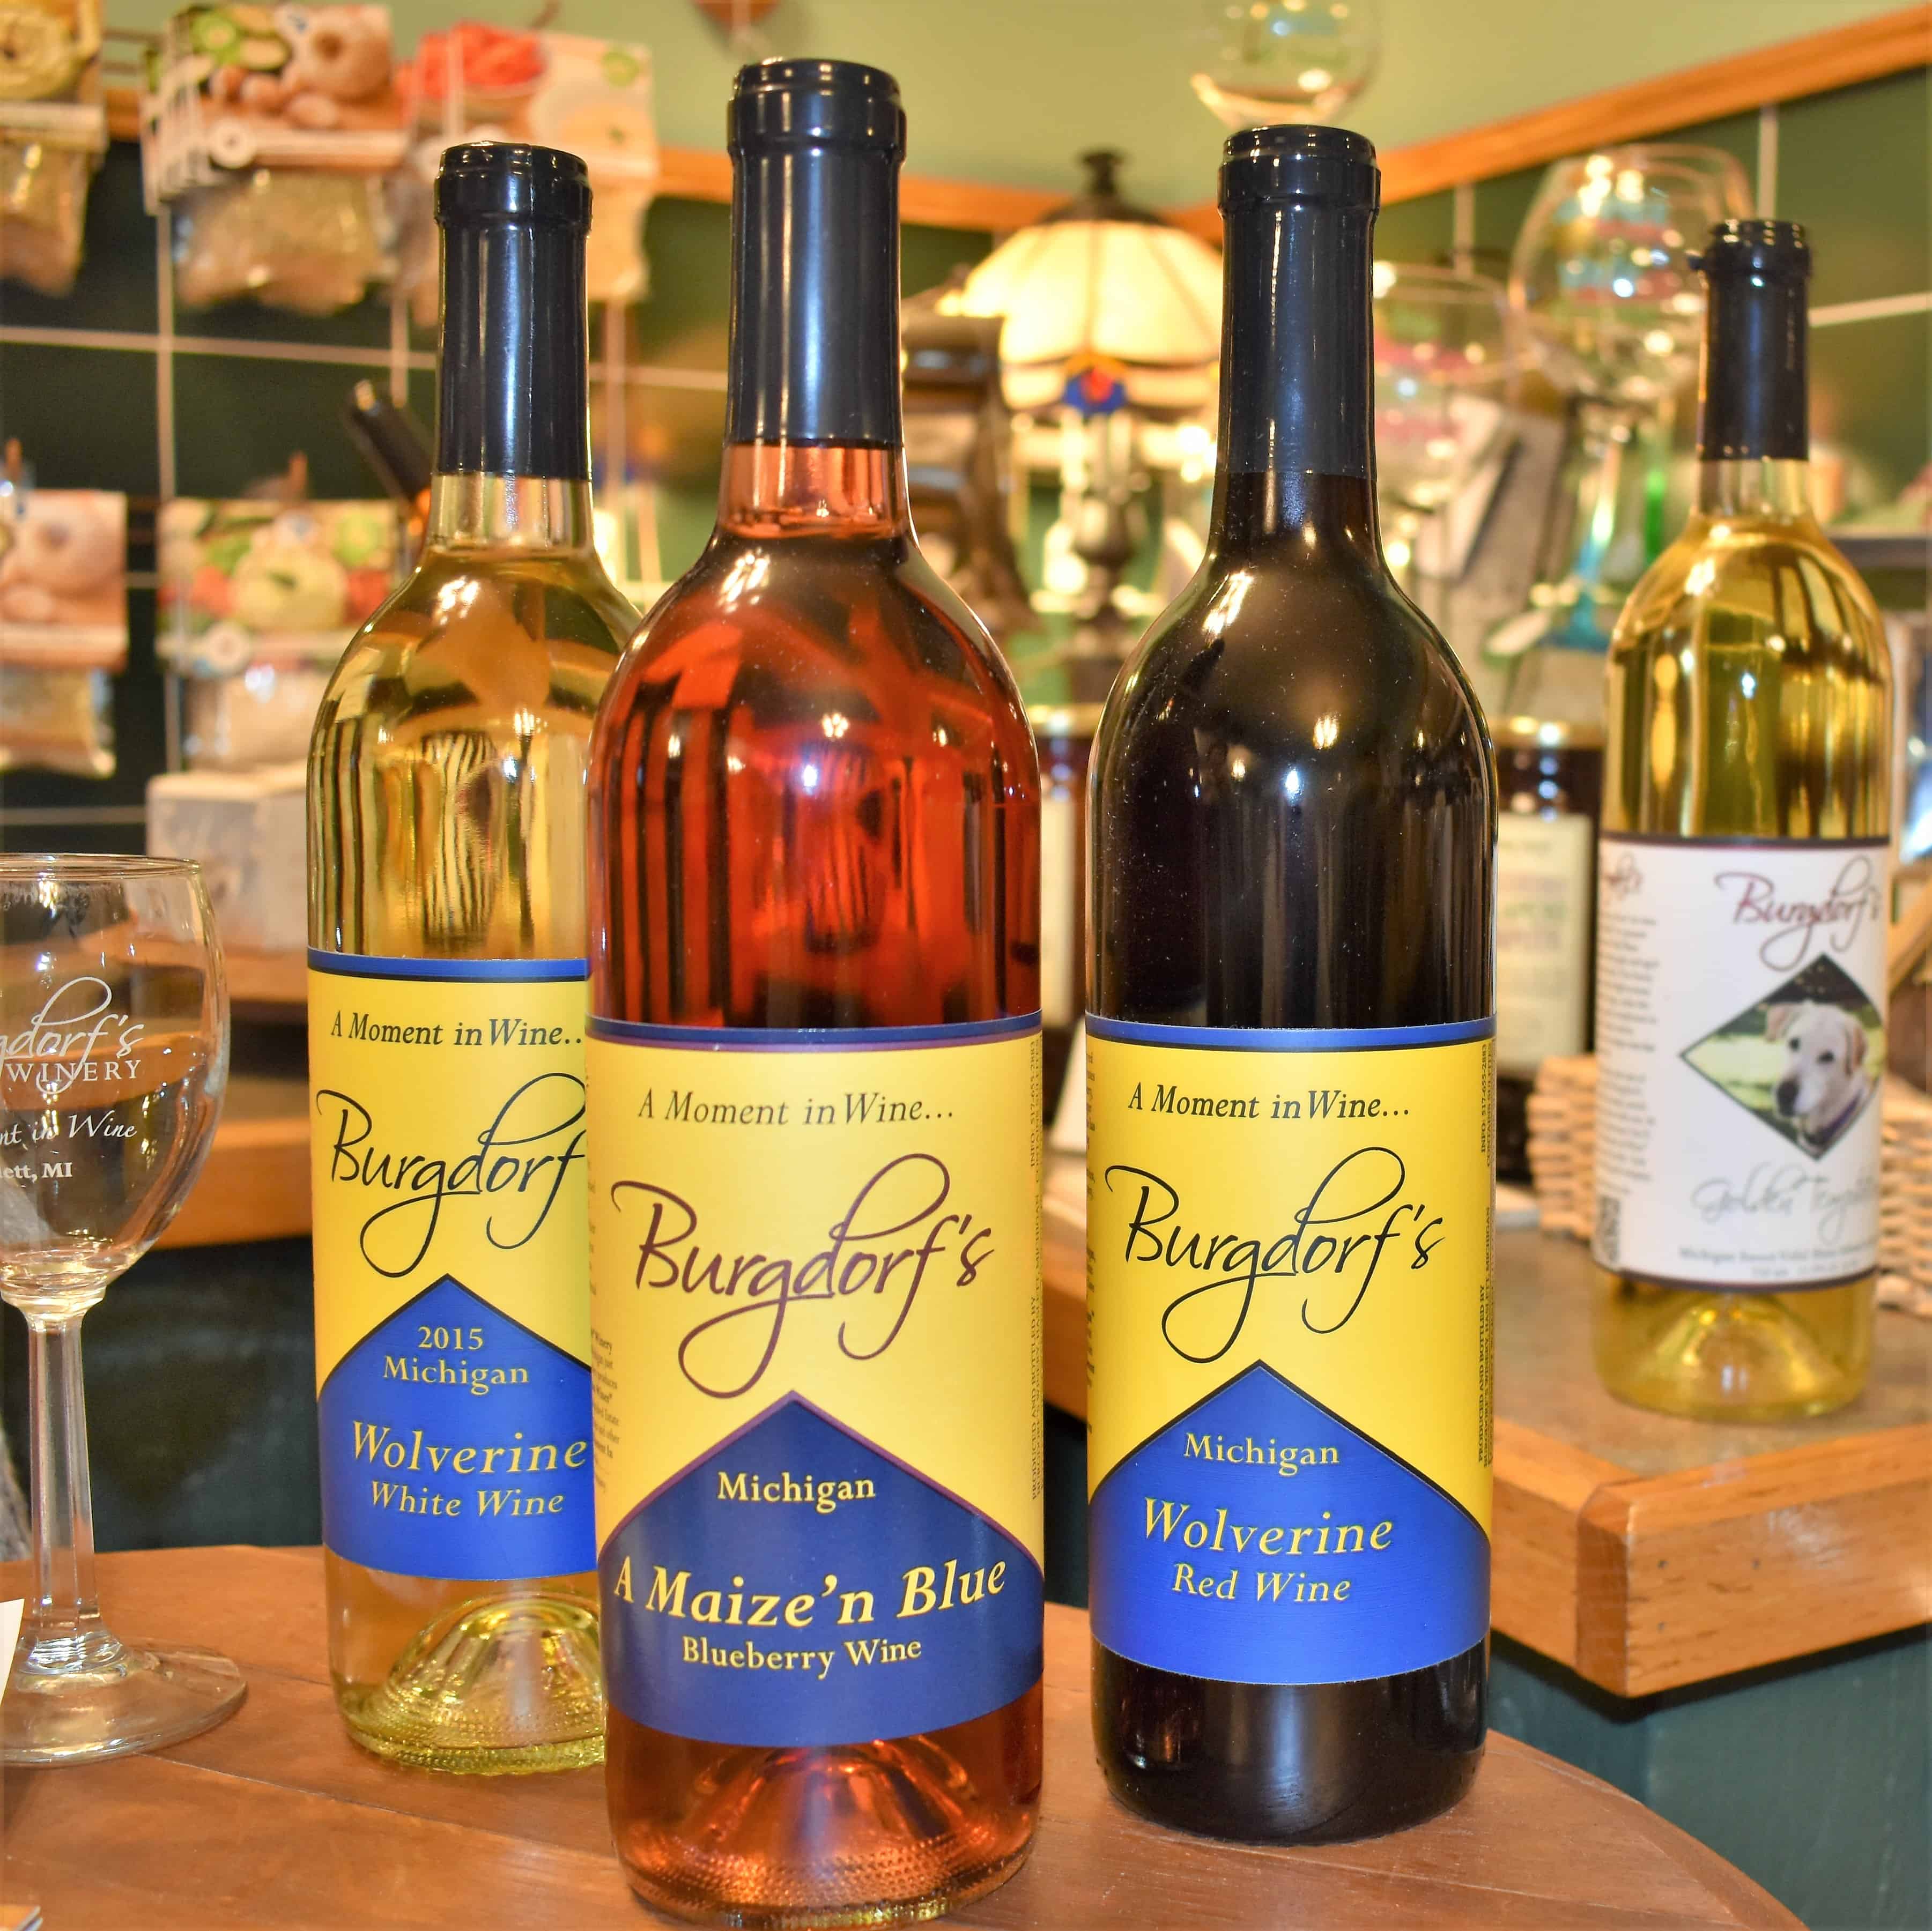 Burgdorf's Wine from their Winery in Haslett, Michigan